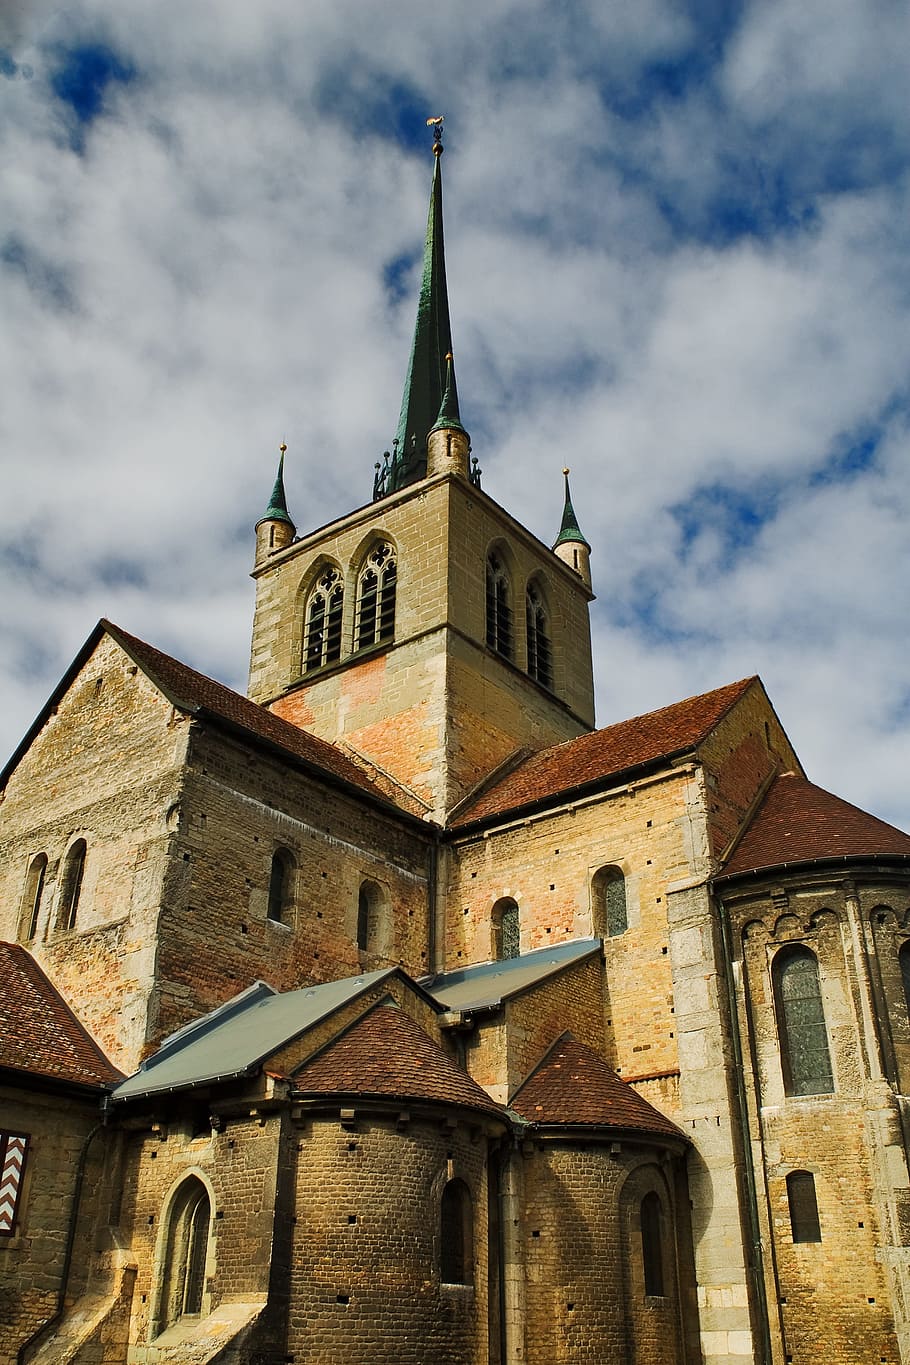 Church, Payerne, Romanesque, Switzerland, abbey, old, architecture, middle ages, sky, history